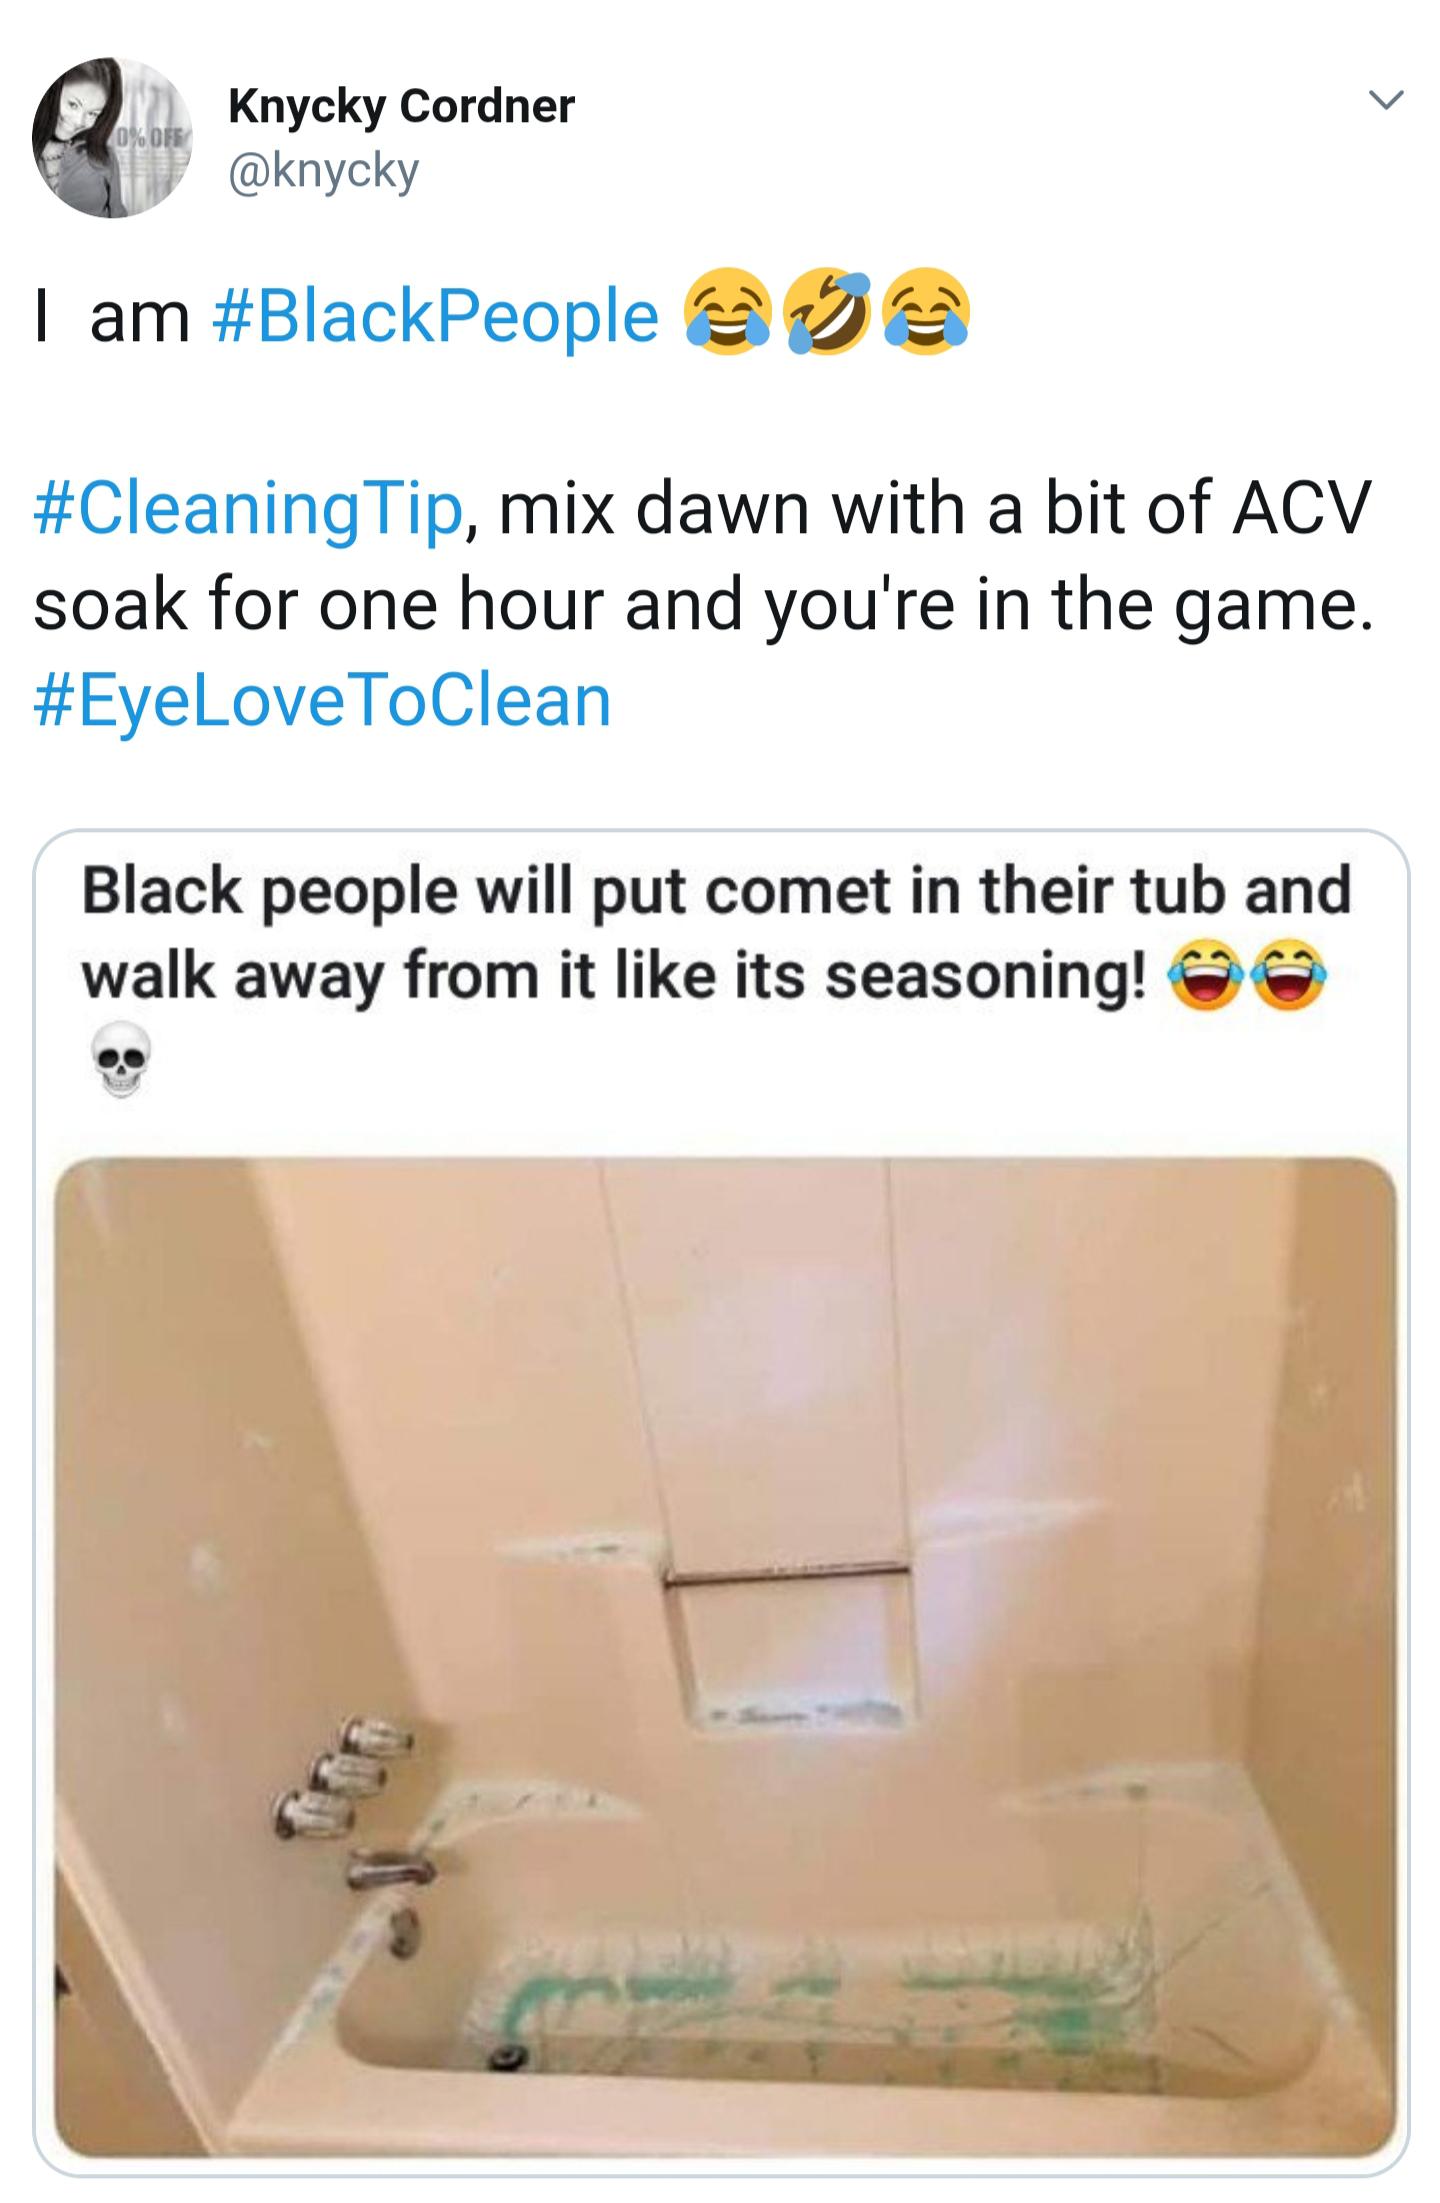 black twitter - I am Tip, mix dawn with a bit of Acv soak for one hour and you're in the game. Black people will put comet in their tub and walk away from it its seasoning!